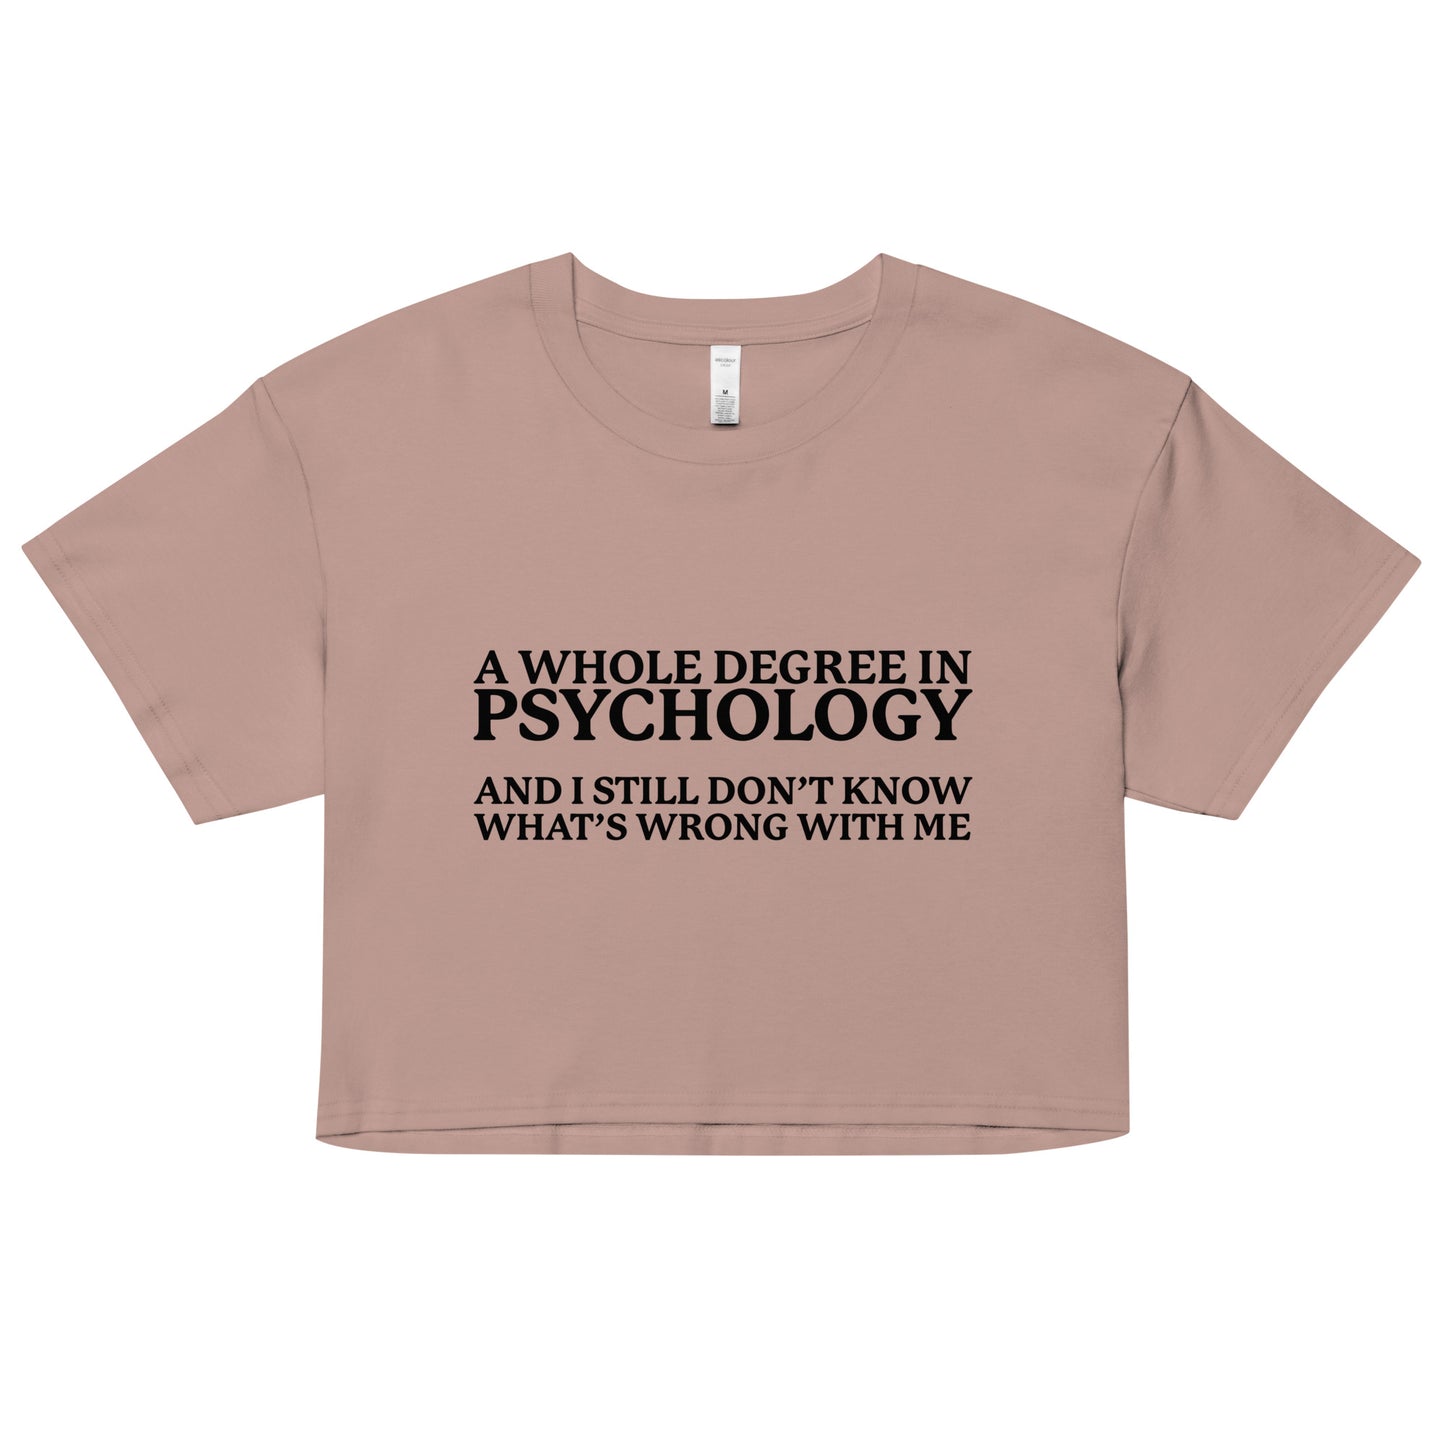 A Whole Degree in Psychology crop top